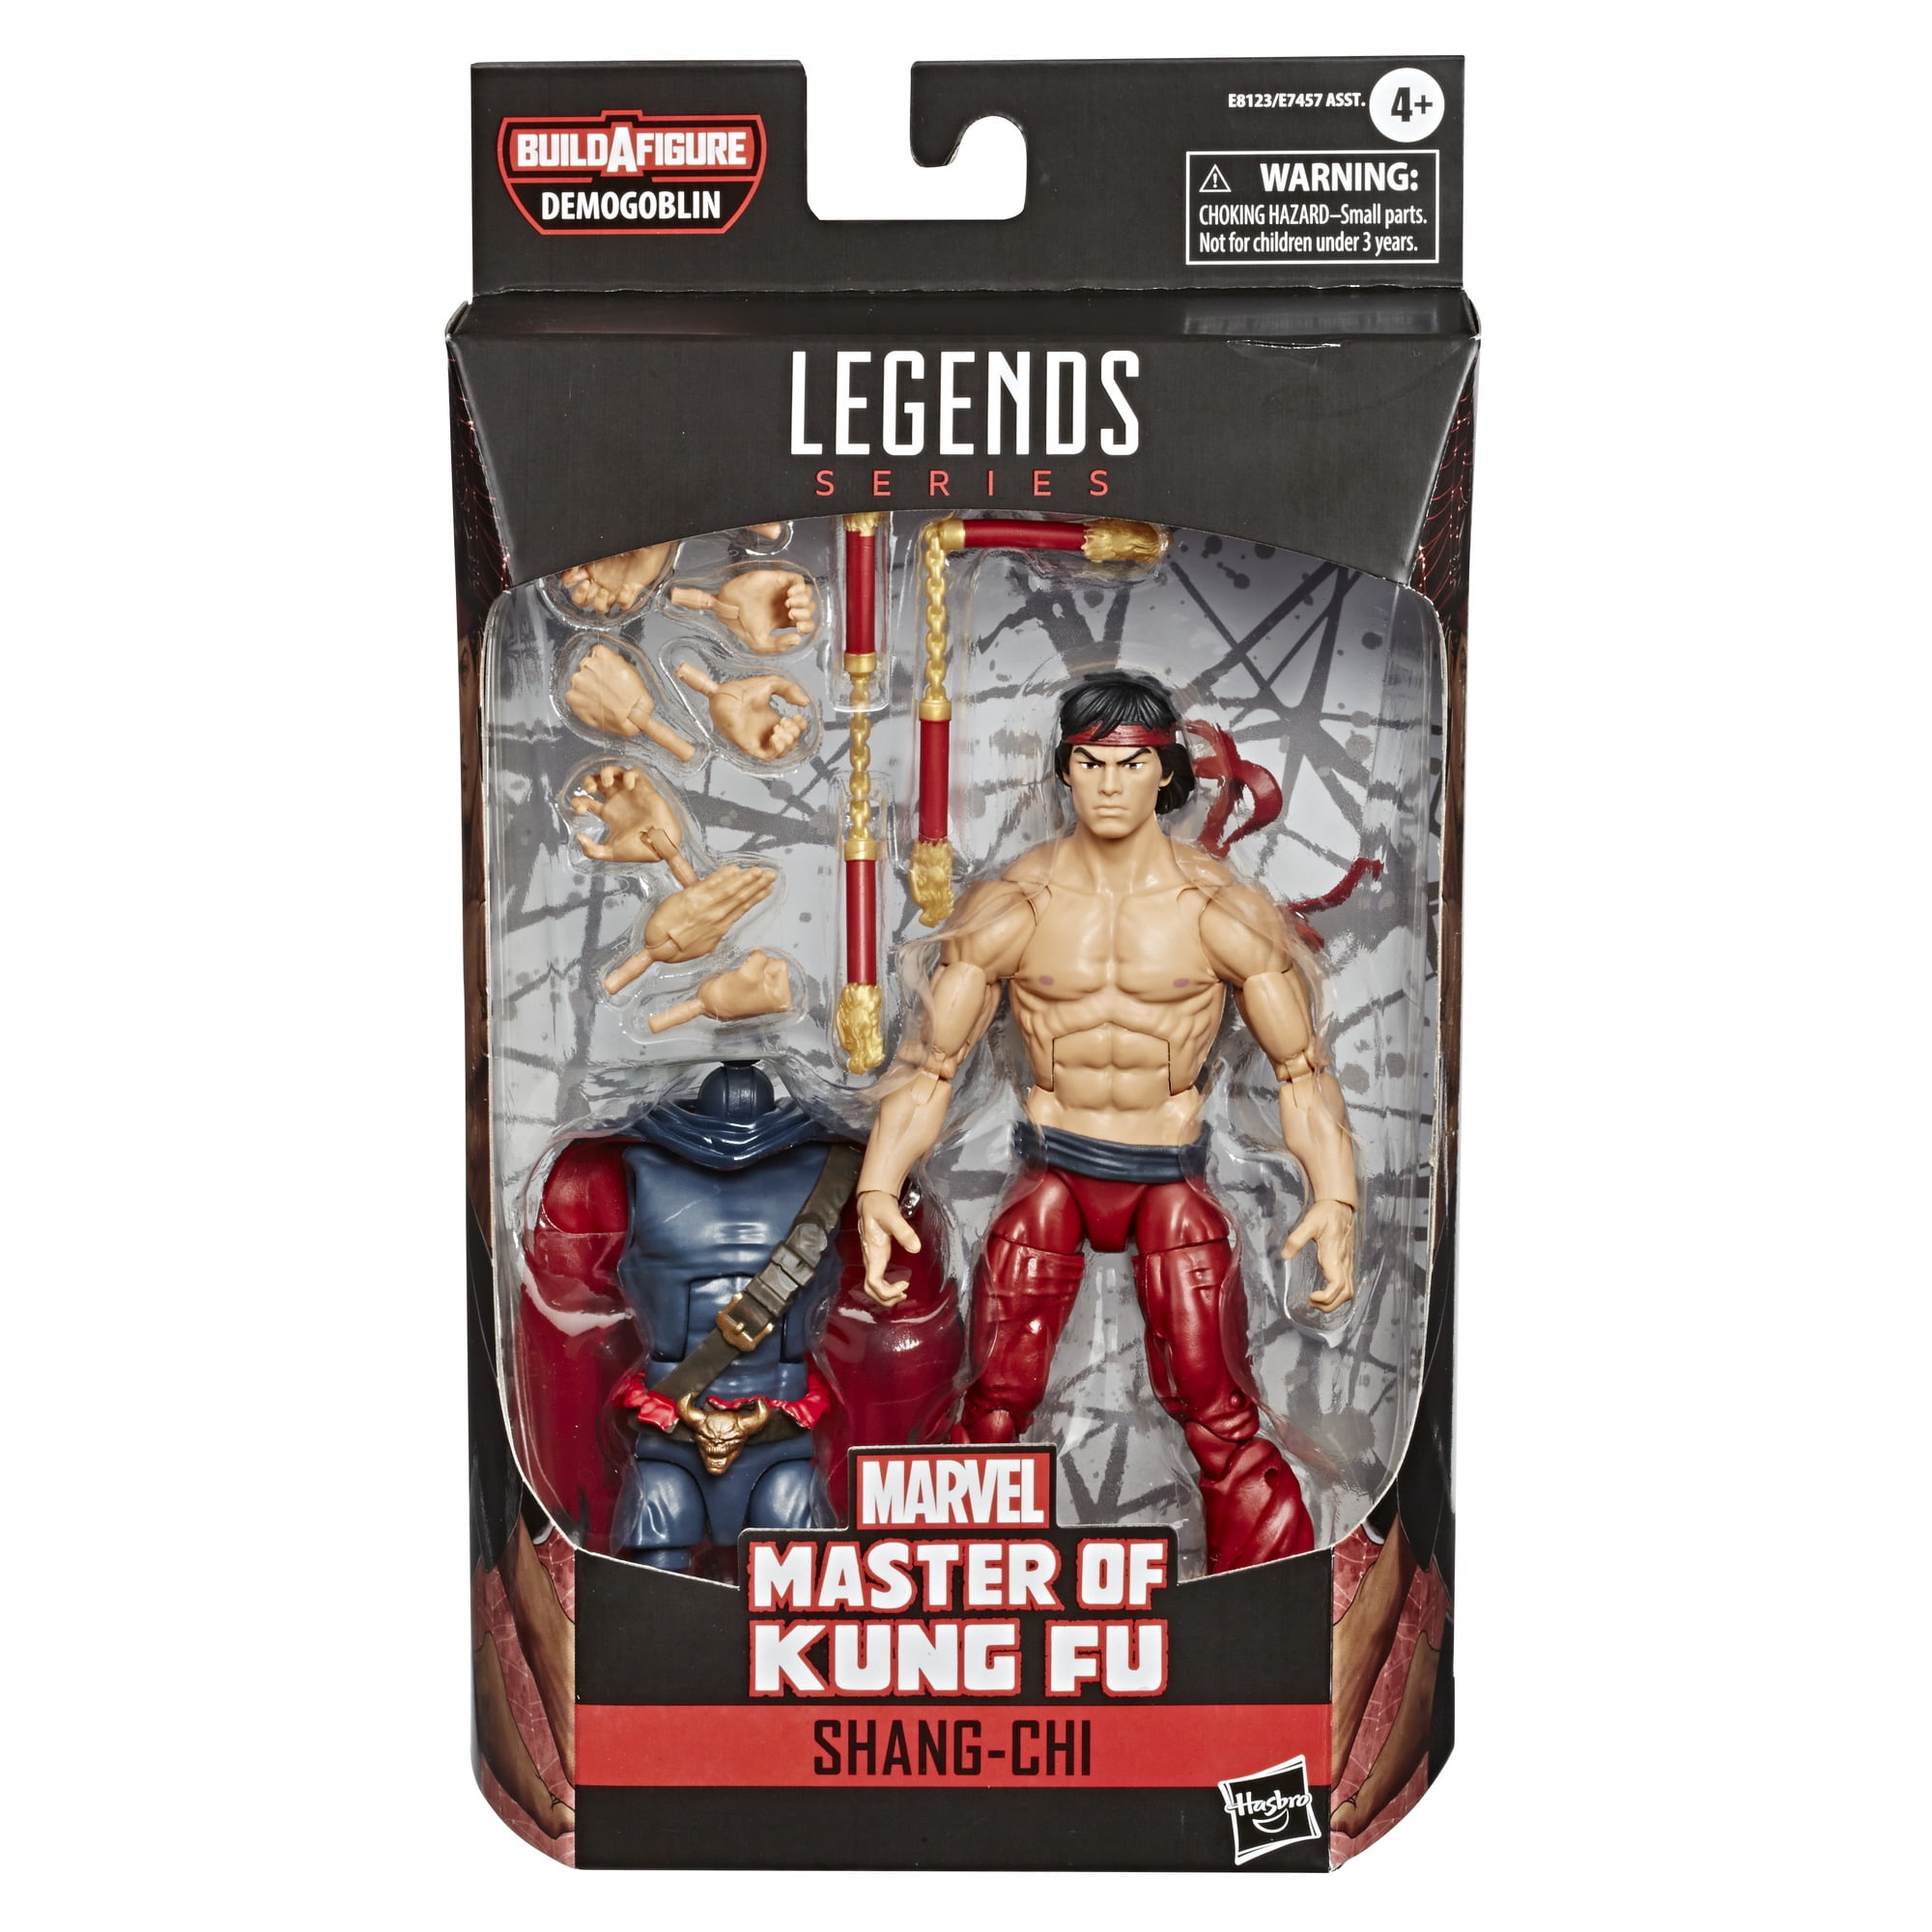 Hasbro Marvel Legends Series 6-inch Action Figure Shang Chi